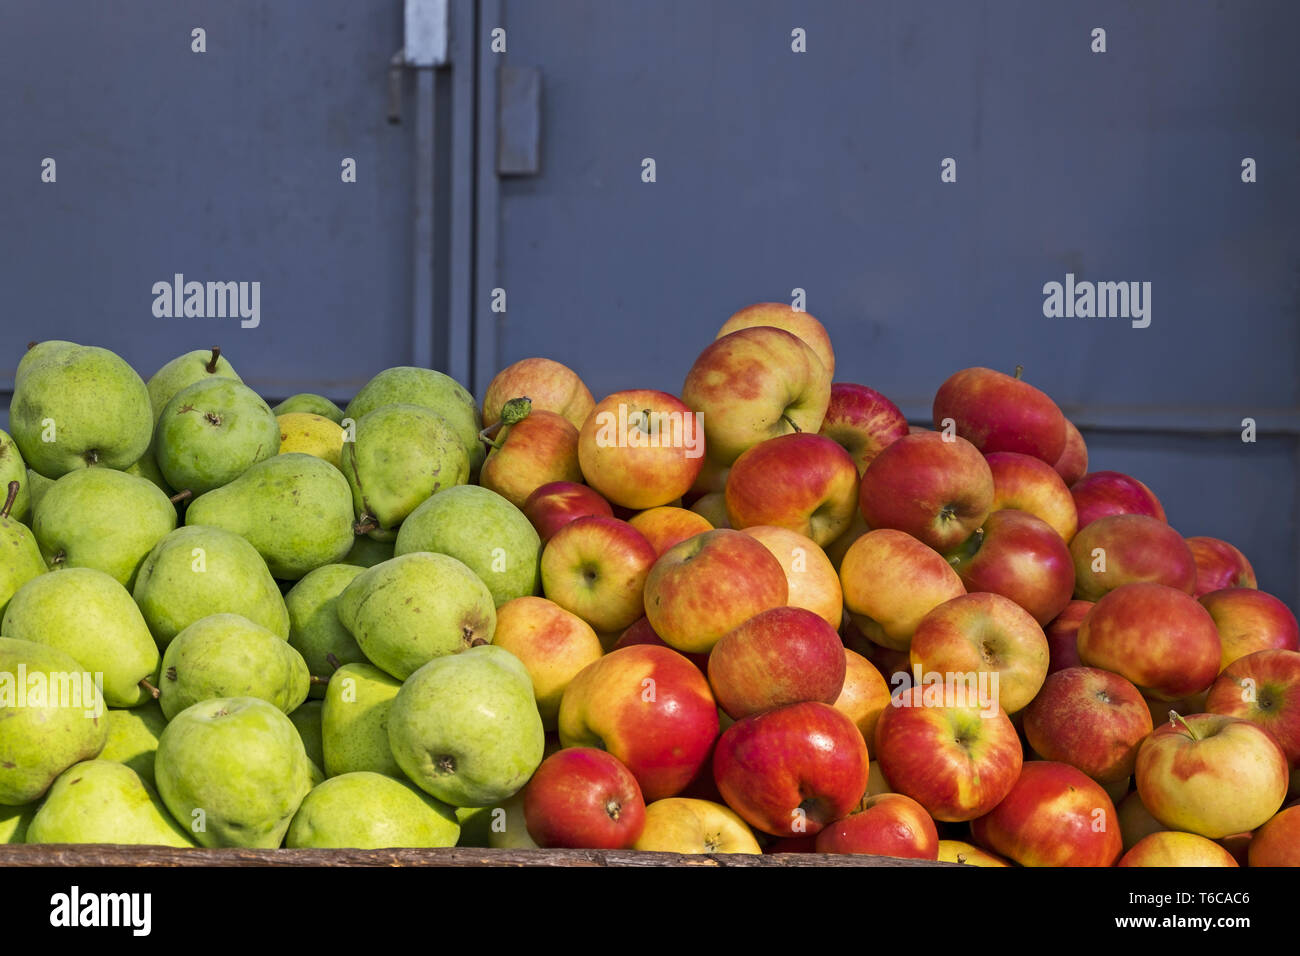 apples and pears Stock Photo